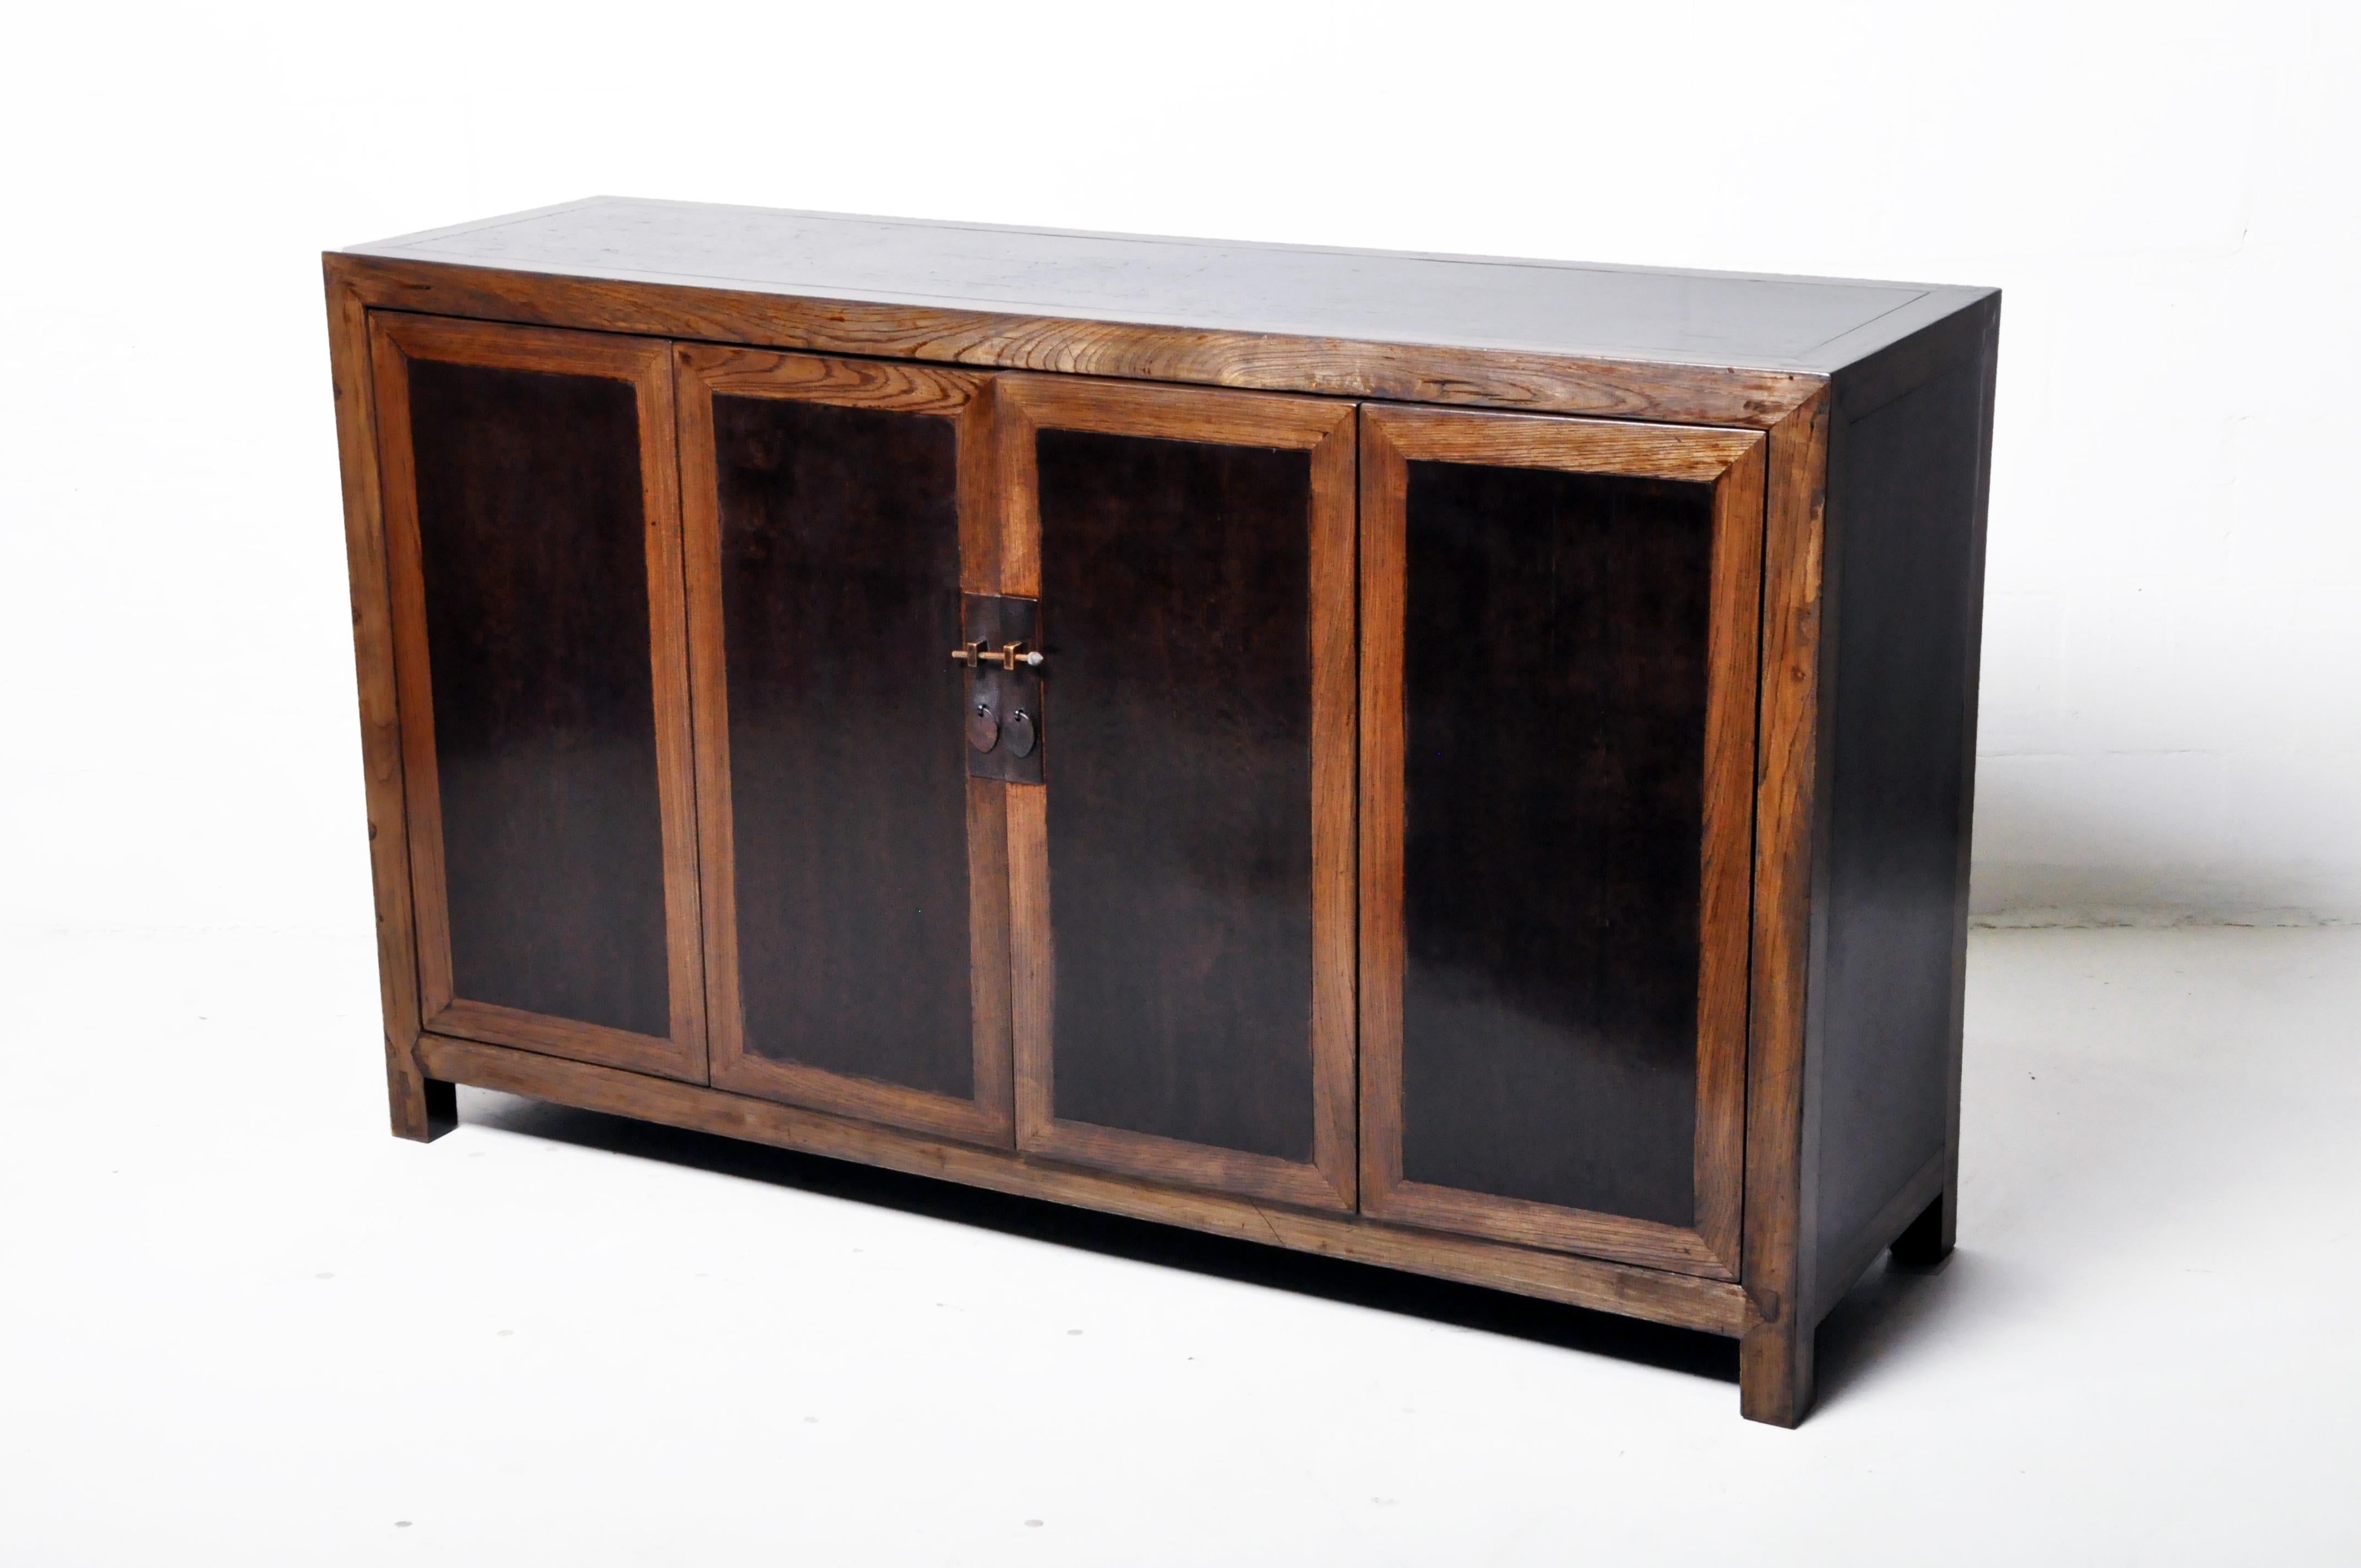 20th Century Chinese Sideboard with a Pair of Bi-Fold Doors